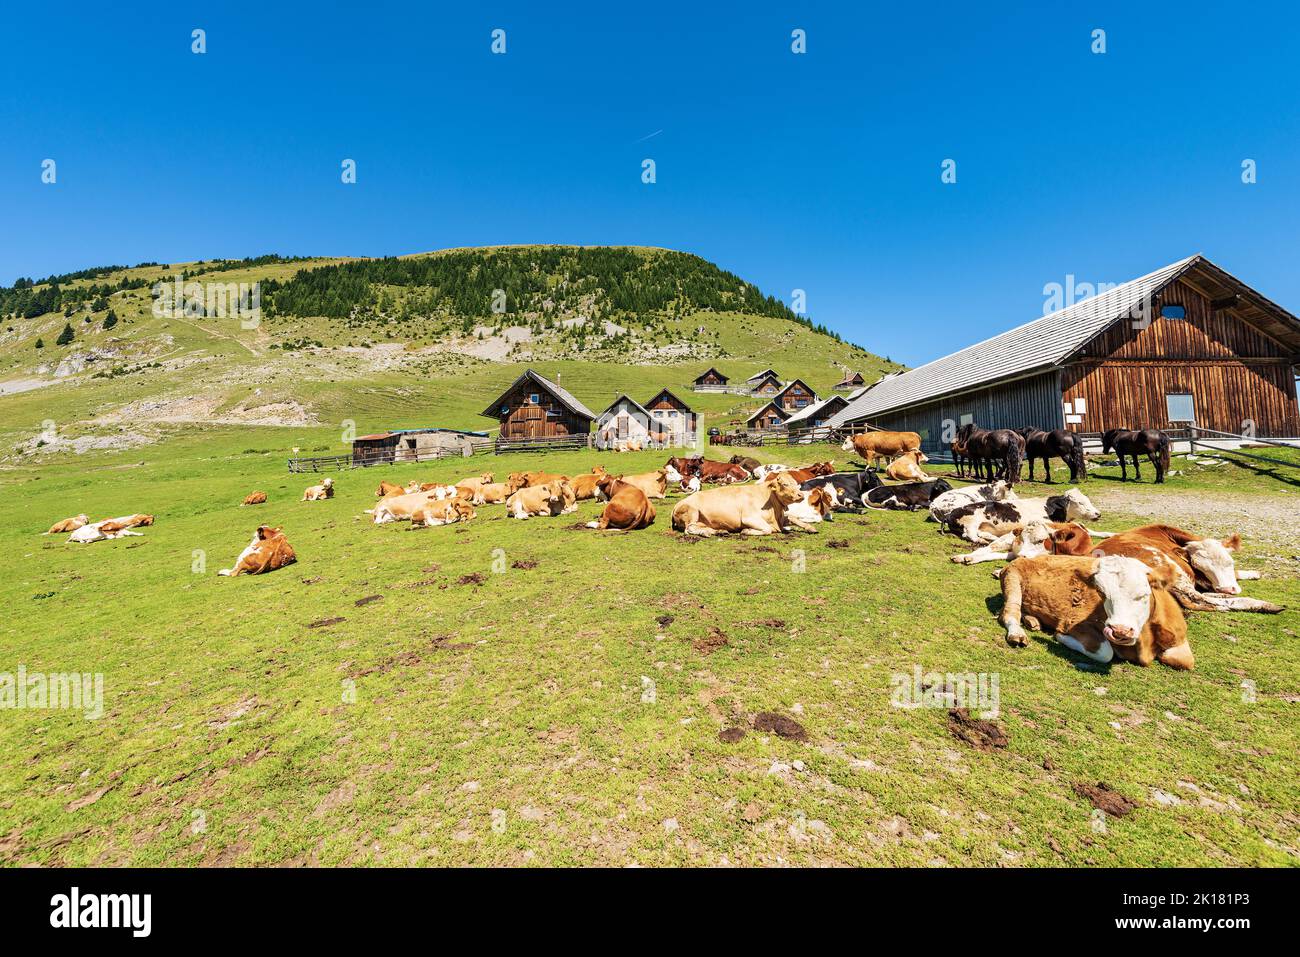 Herd of dairy cows and horses in a mountain pasture, Italy-Austria border, Feistritz an der Gail municipality, Osternig or Oisternig peak, Austria. Stock Photo